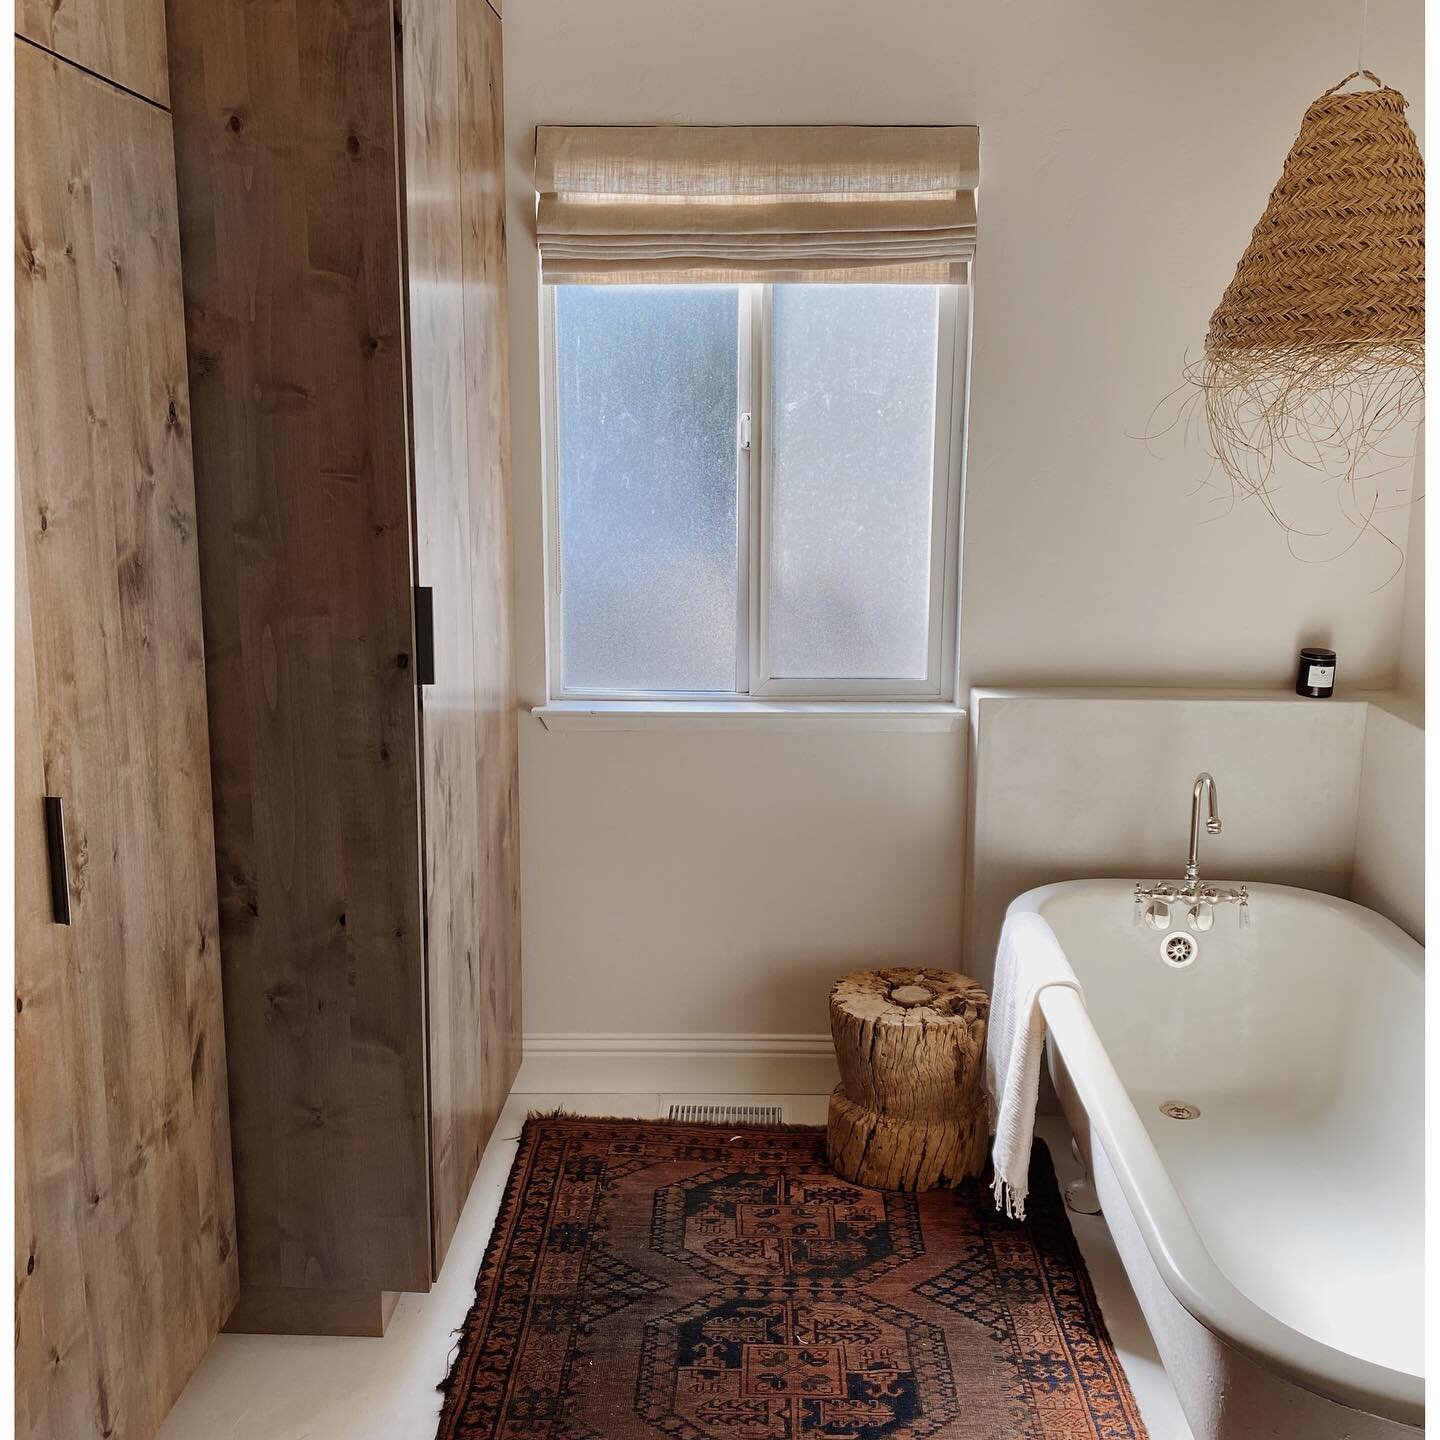 I don&rsquo;t have true before of this bathroom/laundry room but trust me it didn&rsquo;t look like this. We kept the basic footprint but changed ALL the materials. #itsallinthemix ....it now feels so much bigger and more open but warm and cozy and #